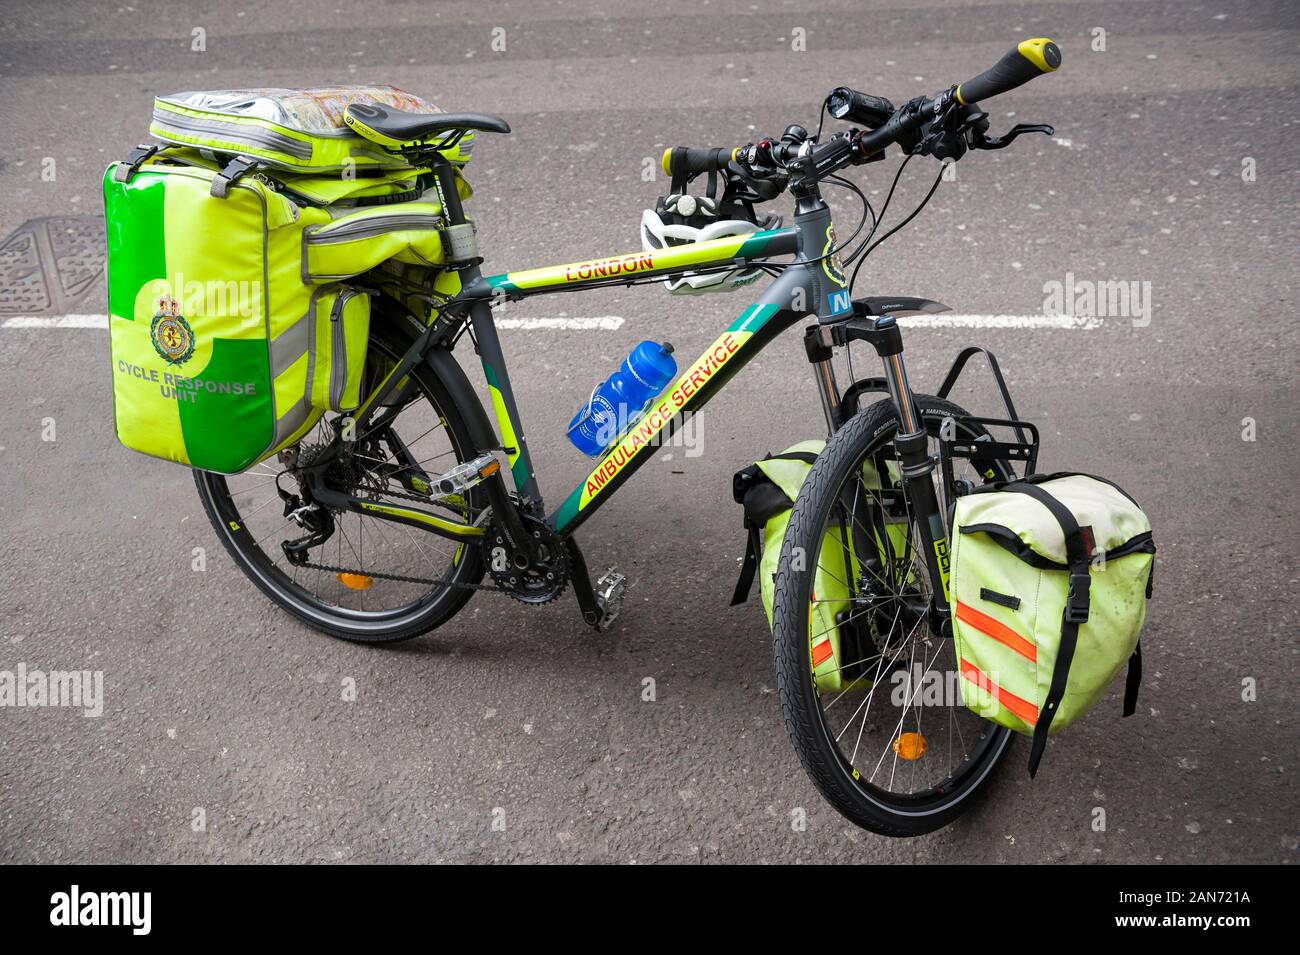 LONDON - JUNE 20, 2012: Ambulance Cycle Response bicycle stands parked with a kit that includes a defibrillator and oxygen. Stock Photo